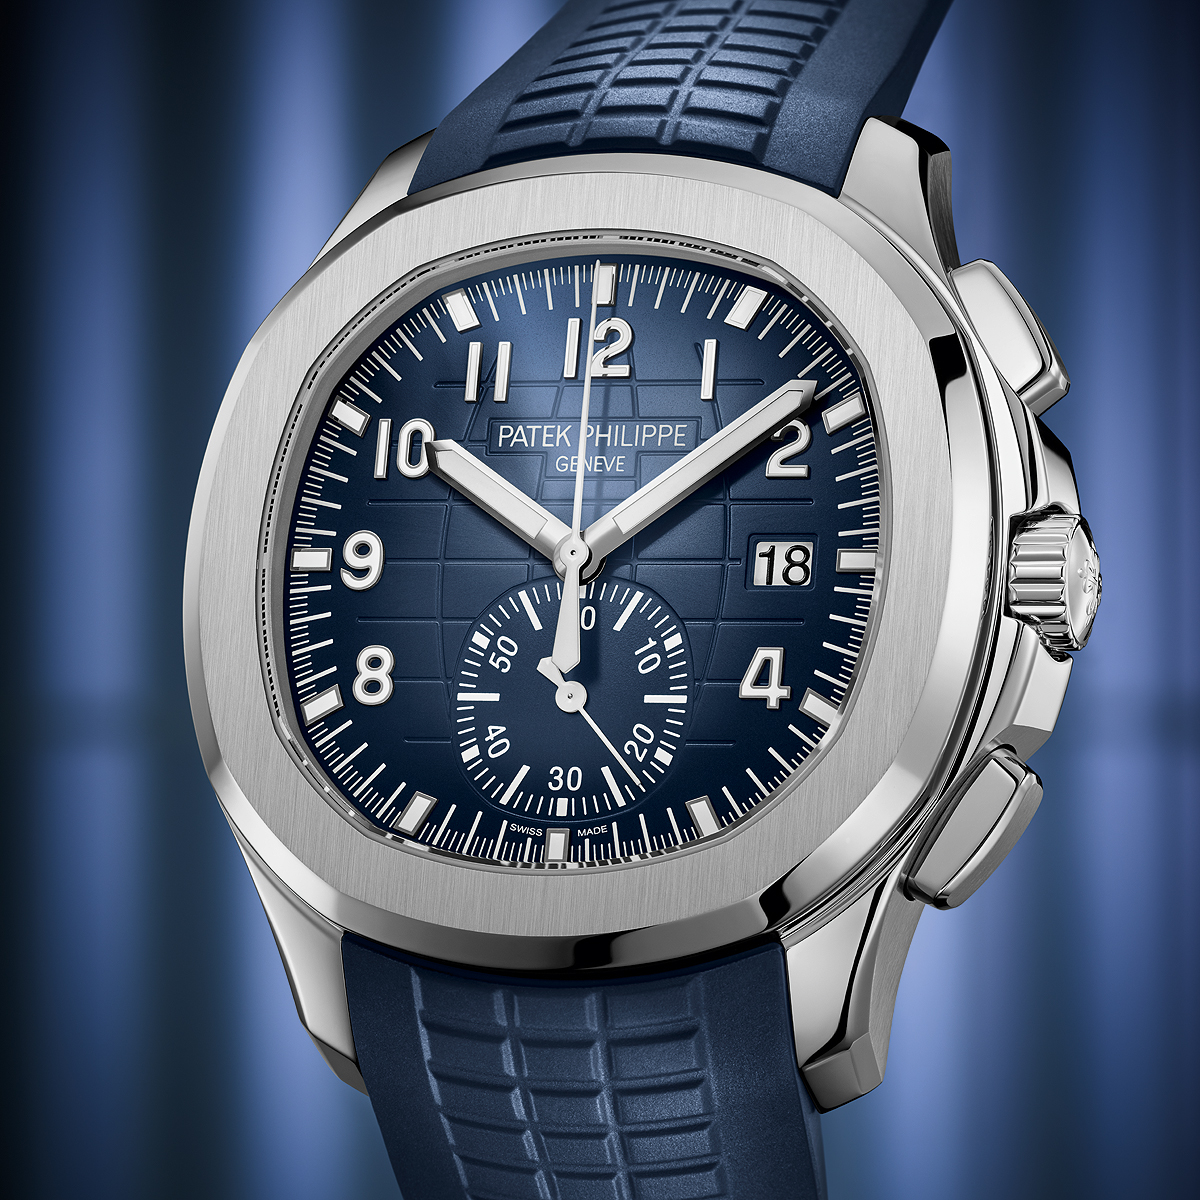 The Patek Philippe Aquanaut is a High-End Sports Watch Icon